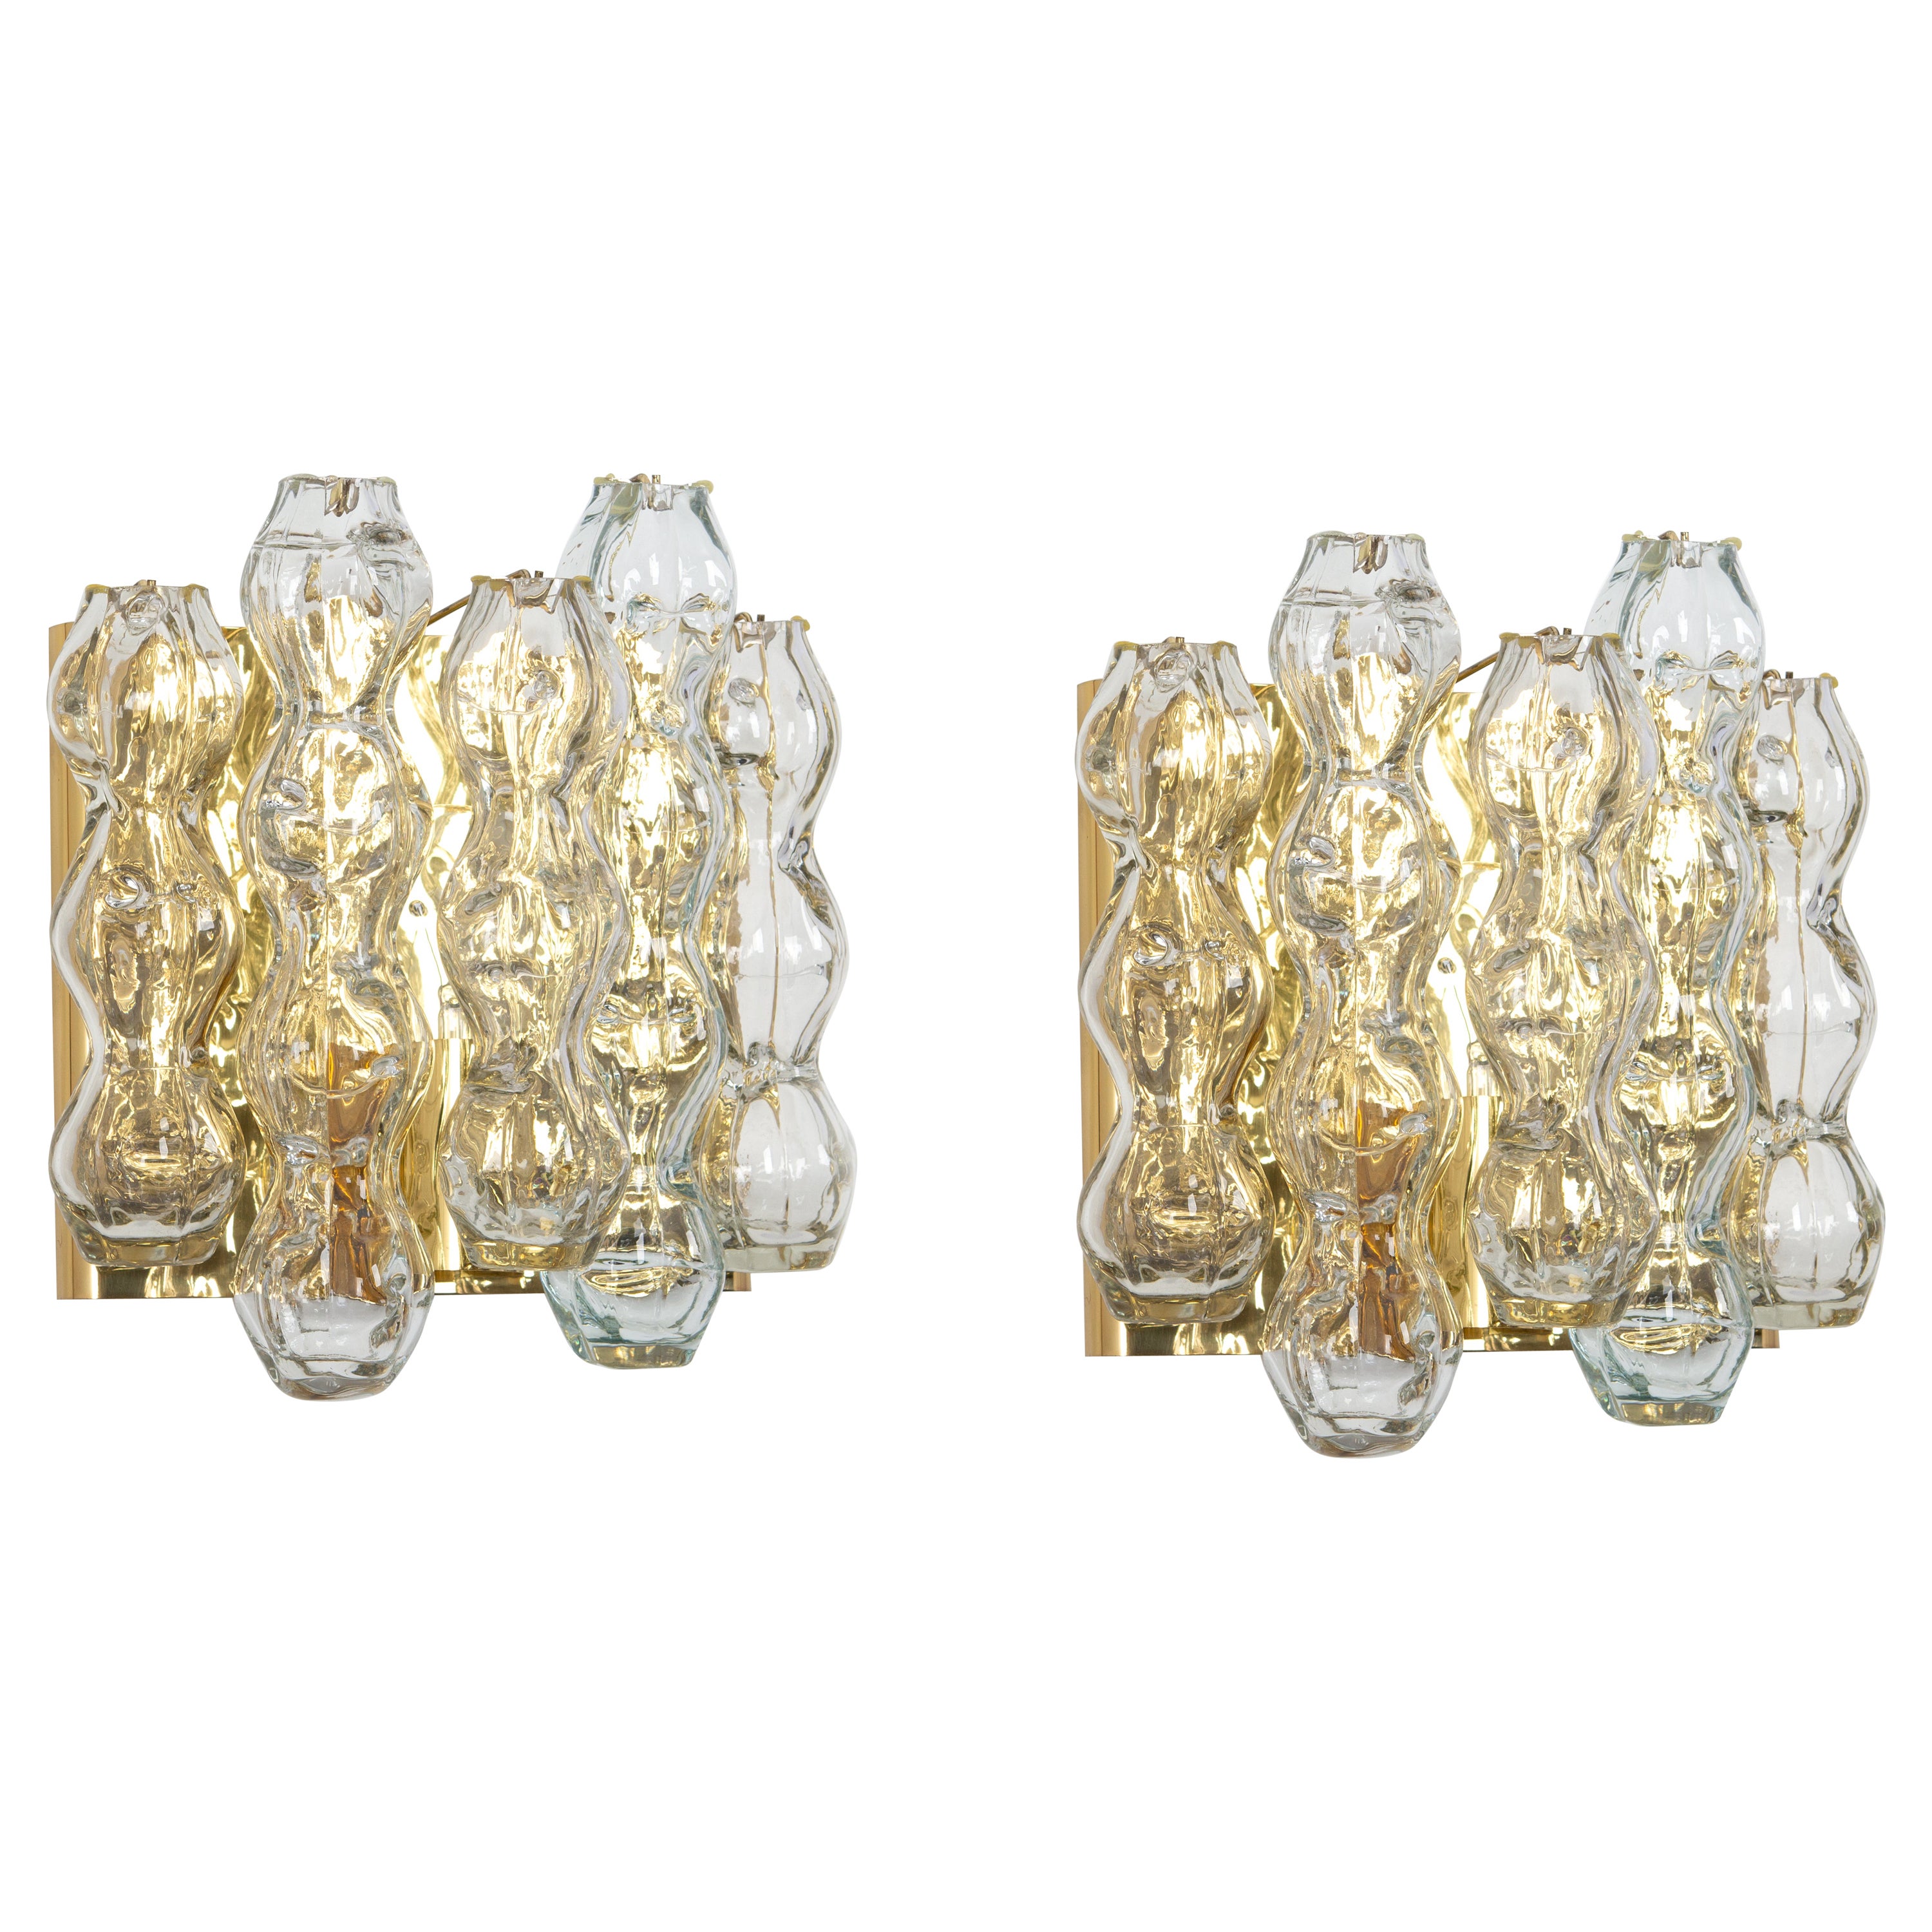 Pair of Large Murano Glass Wall Sconces by Doria, Germany, 1960s For Sale